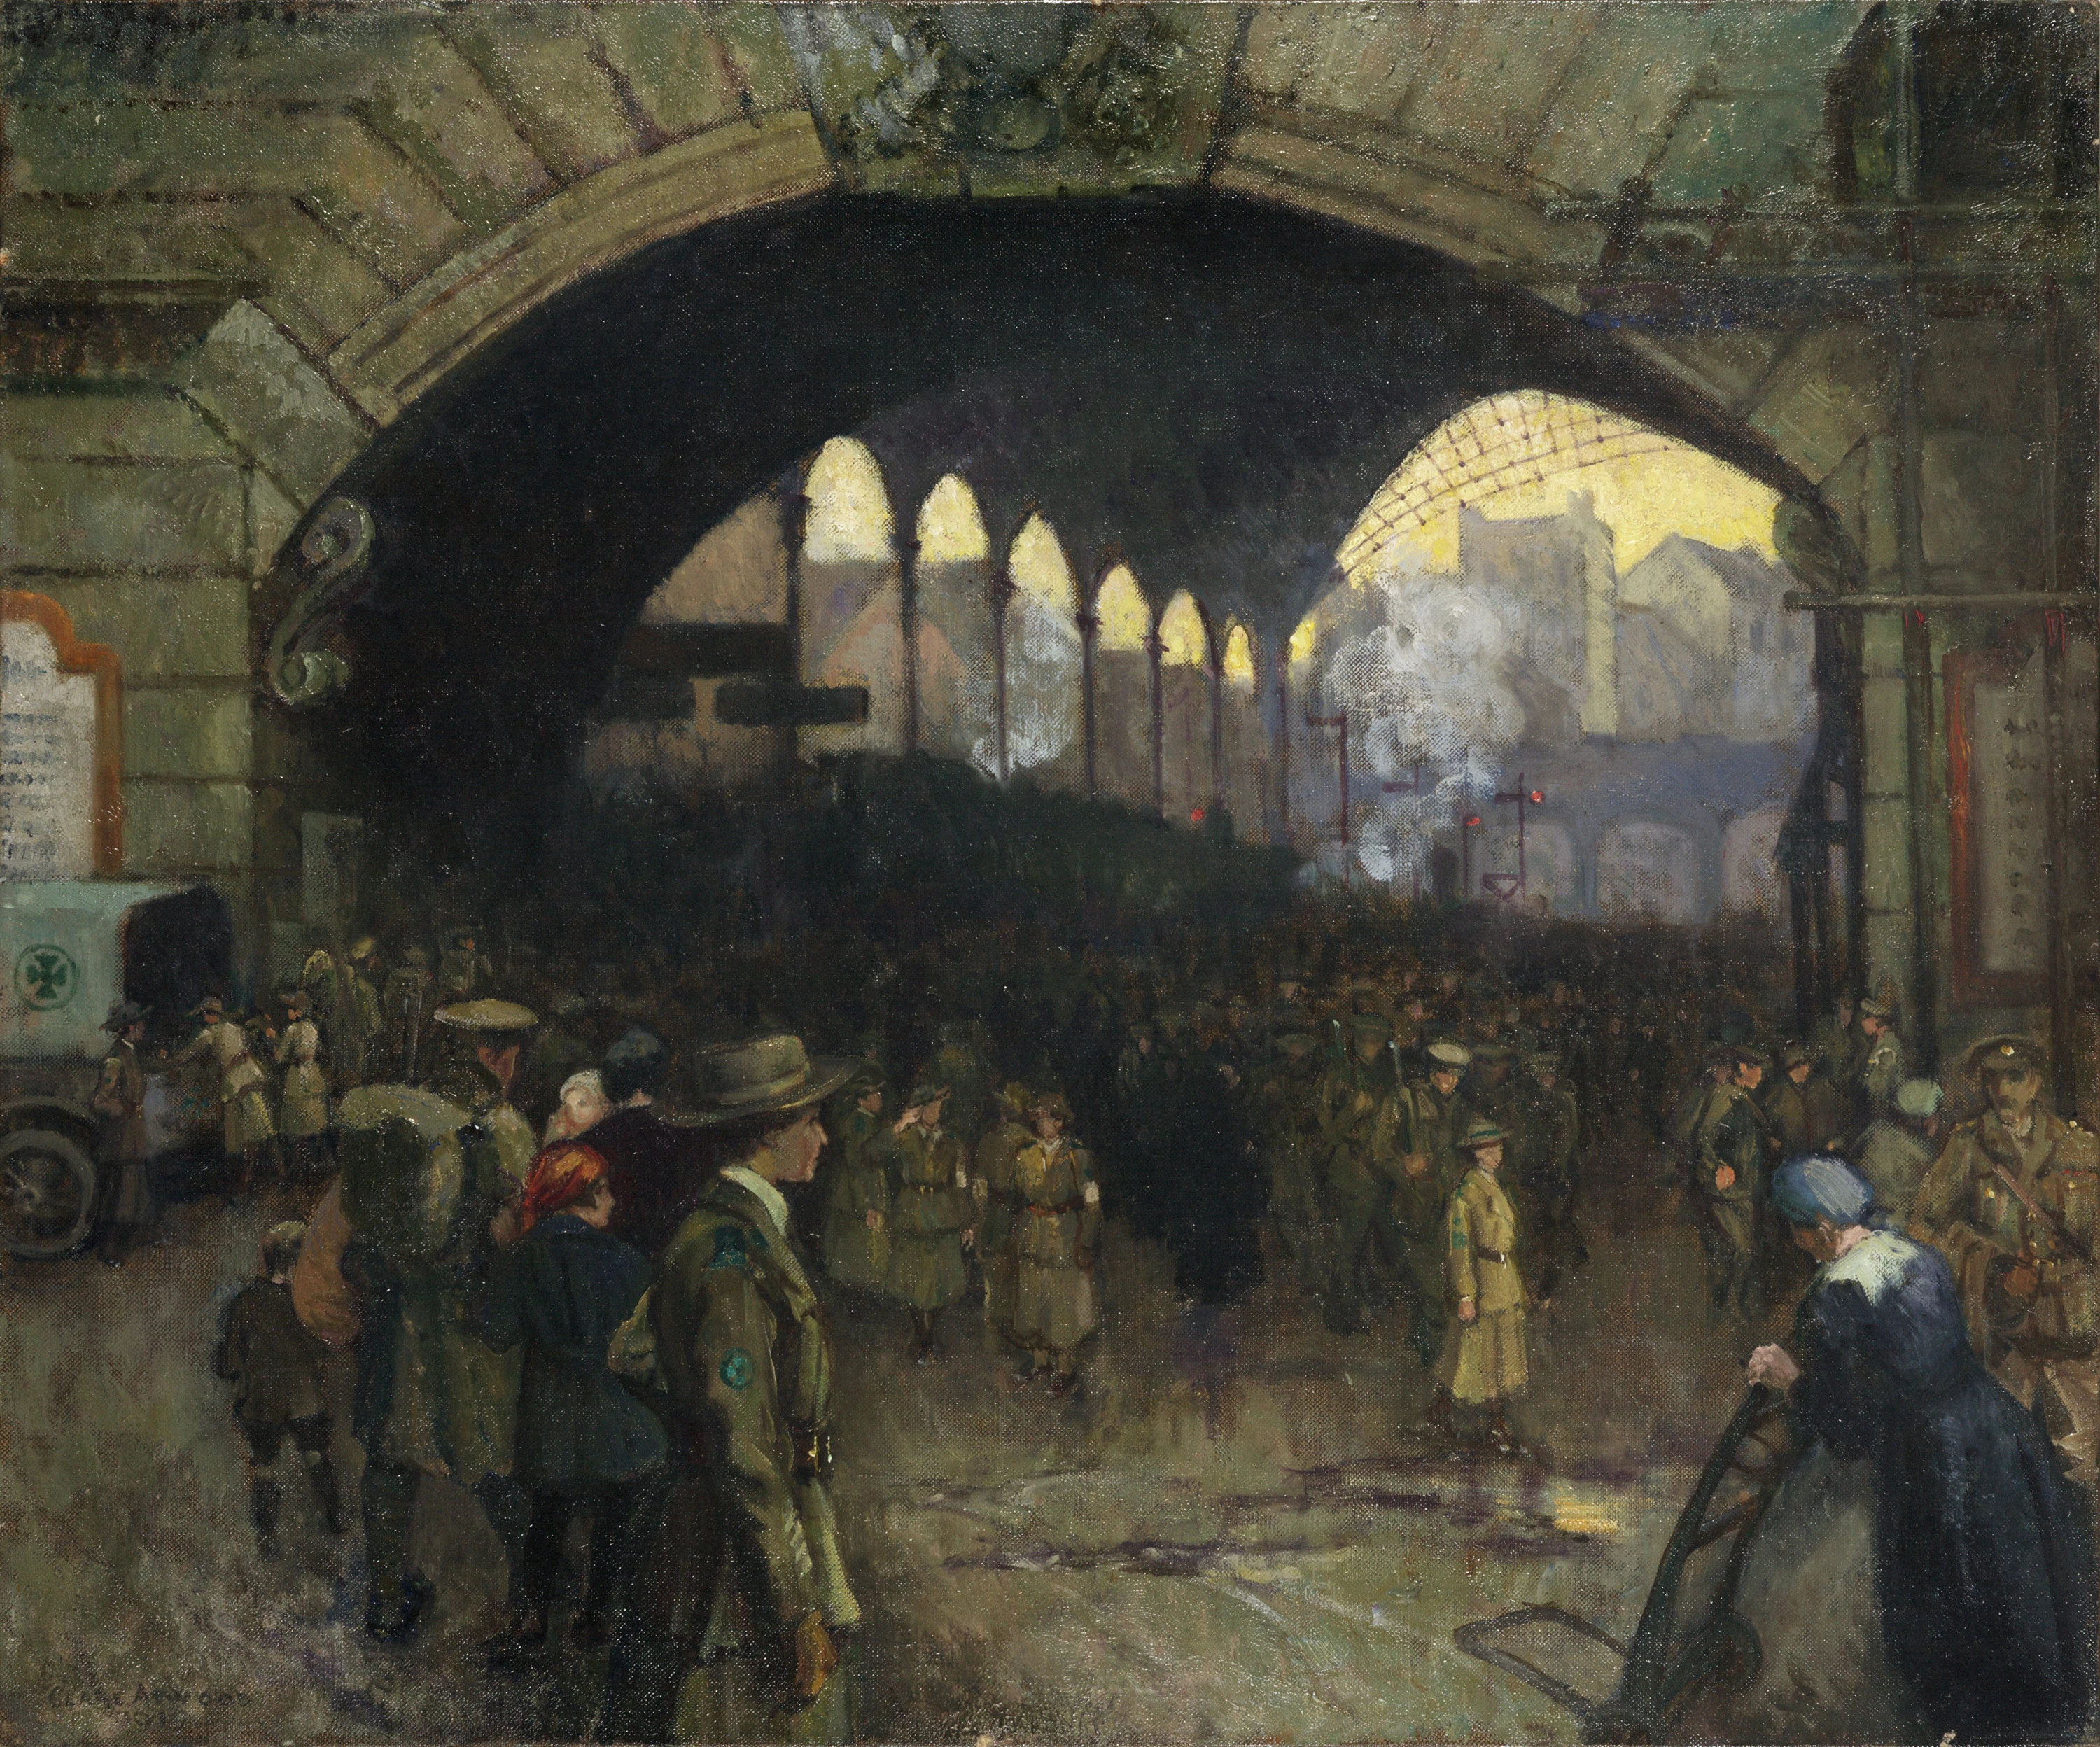 Victoria Station 1918: The Green Cross Corps, Clare Atwood